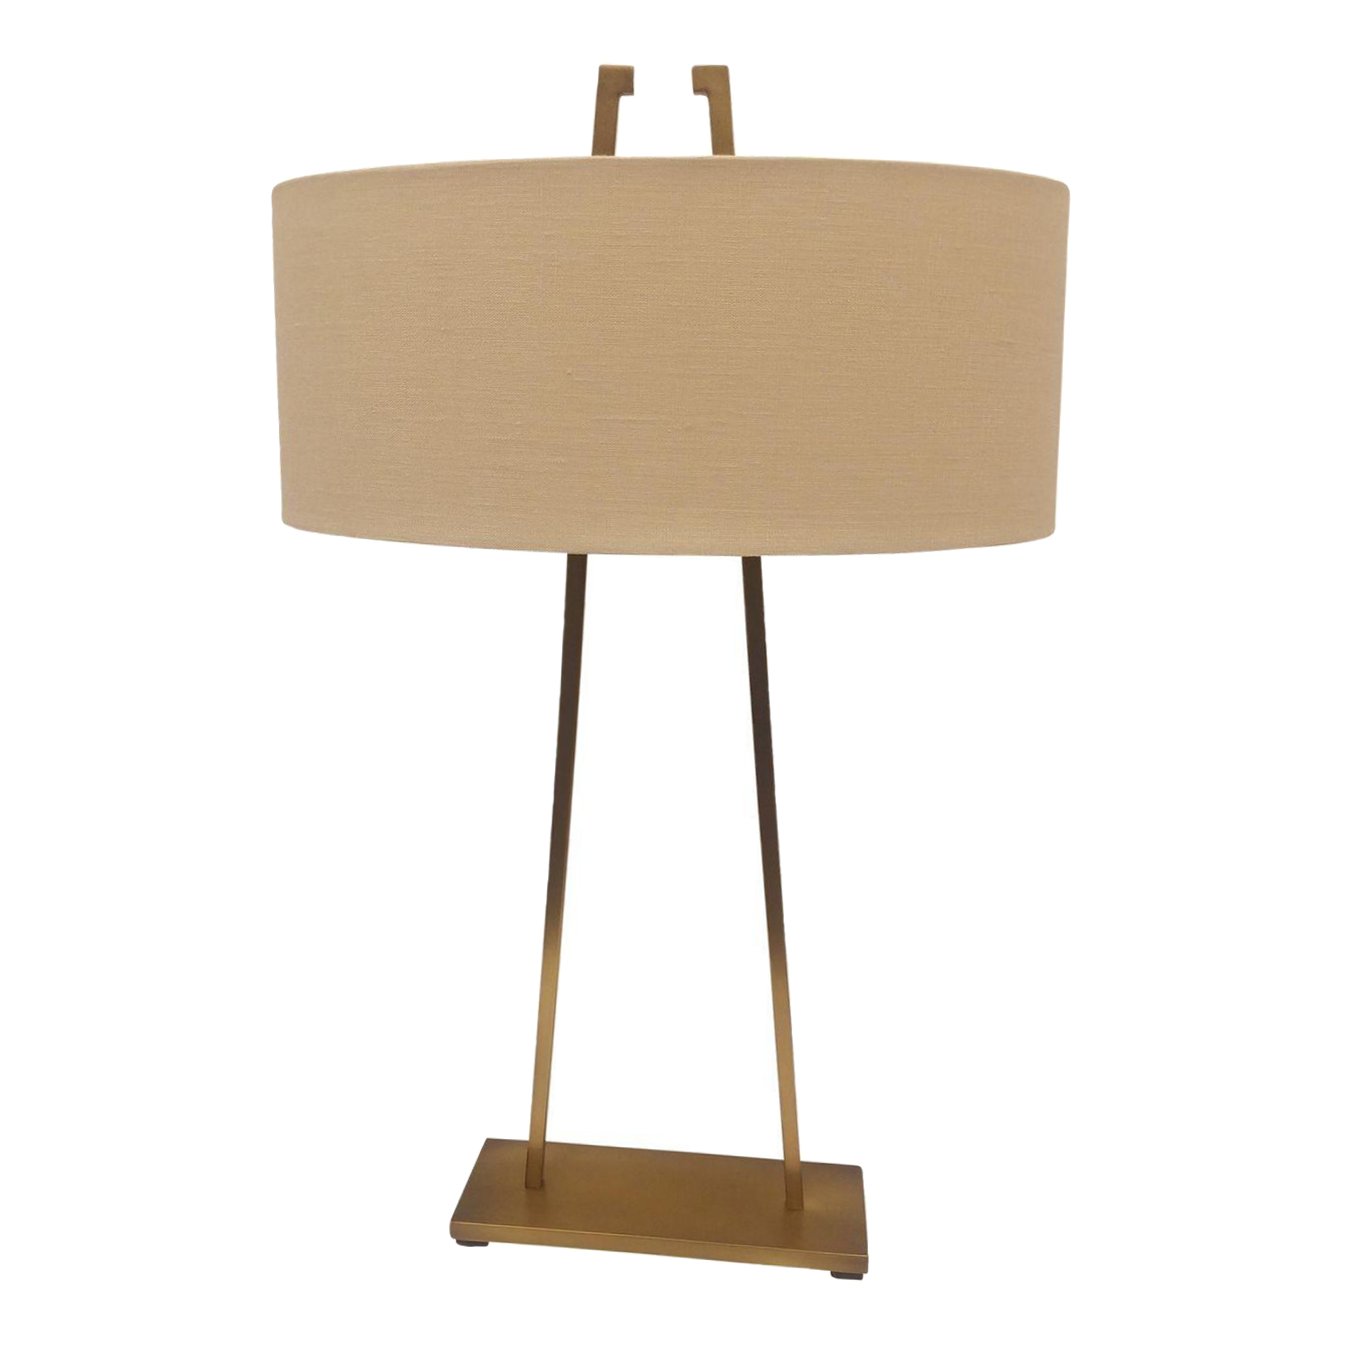 tanner kenzie table lamp chairish and accent antique telephone bathroom stand vintage octagon side console mirrors square nesting tables half moon target kindle fire round top